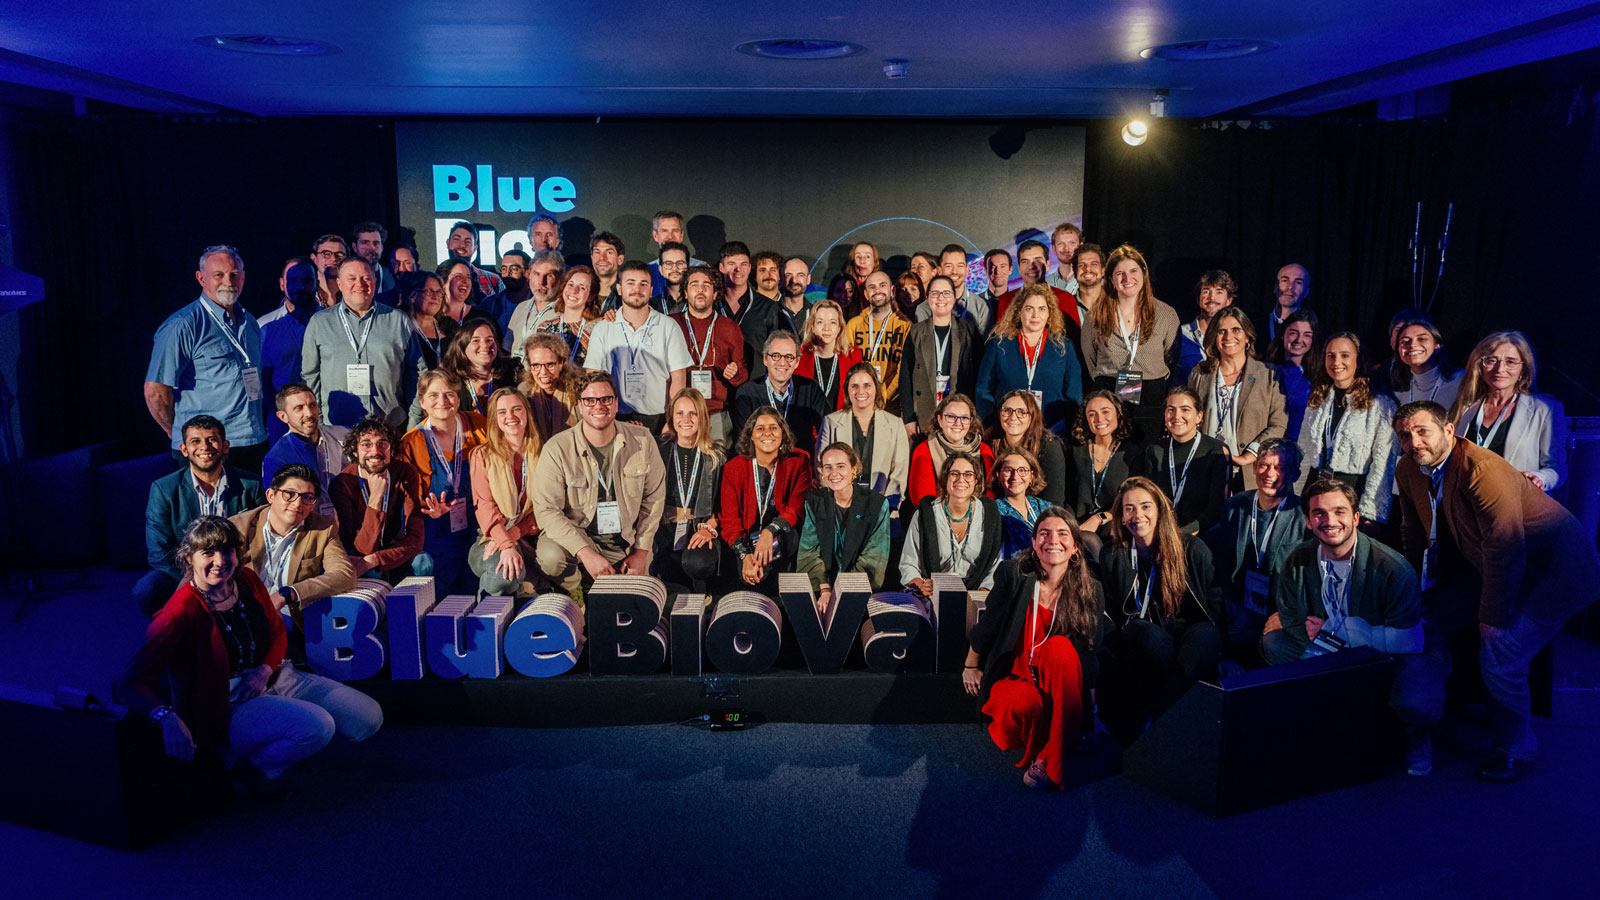 Group photo of all the Blue Bio Value participants